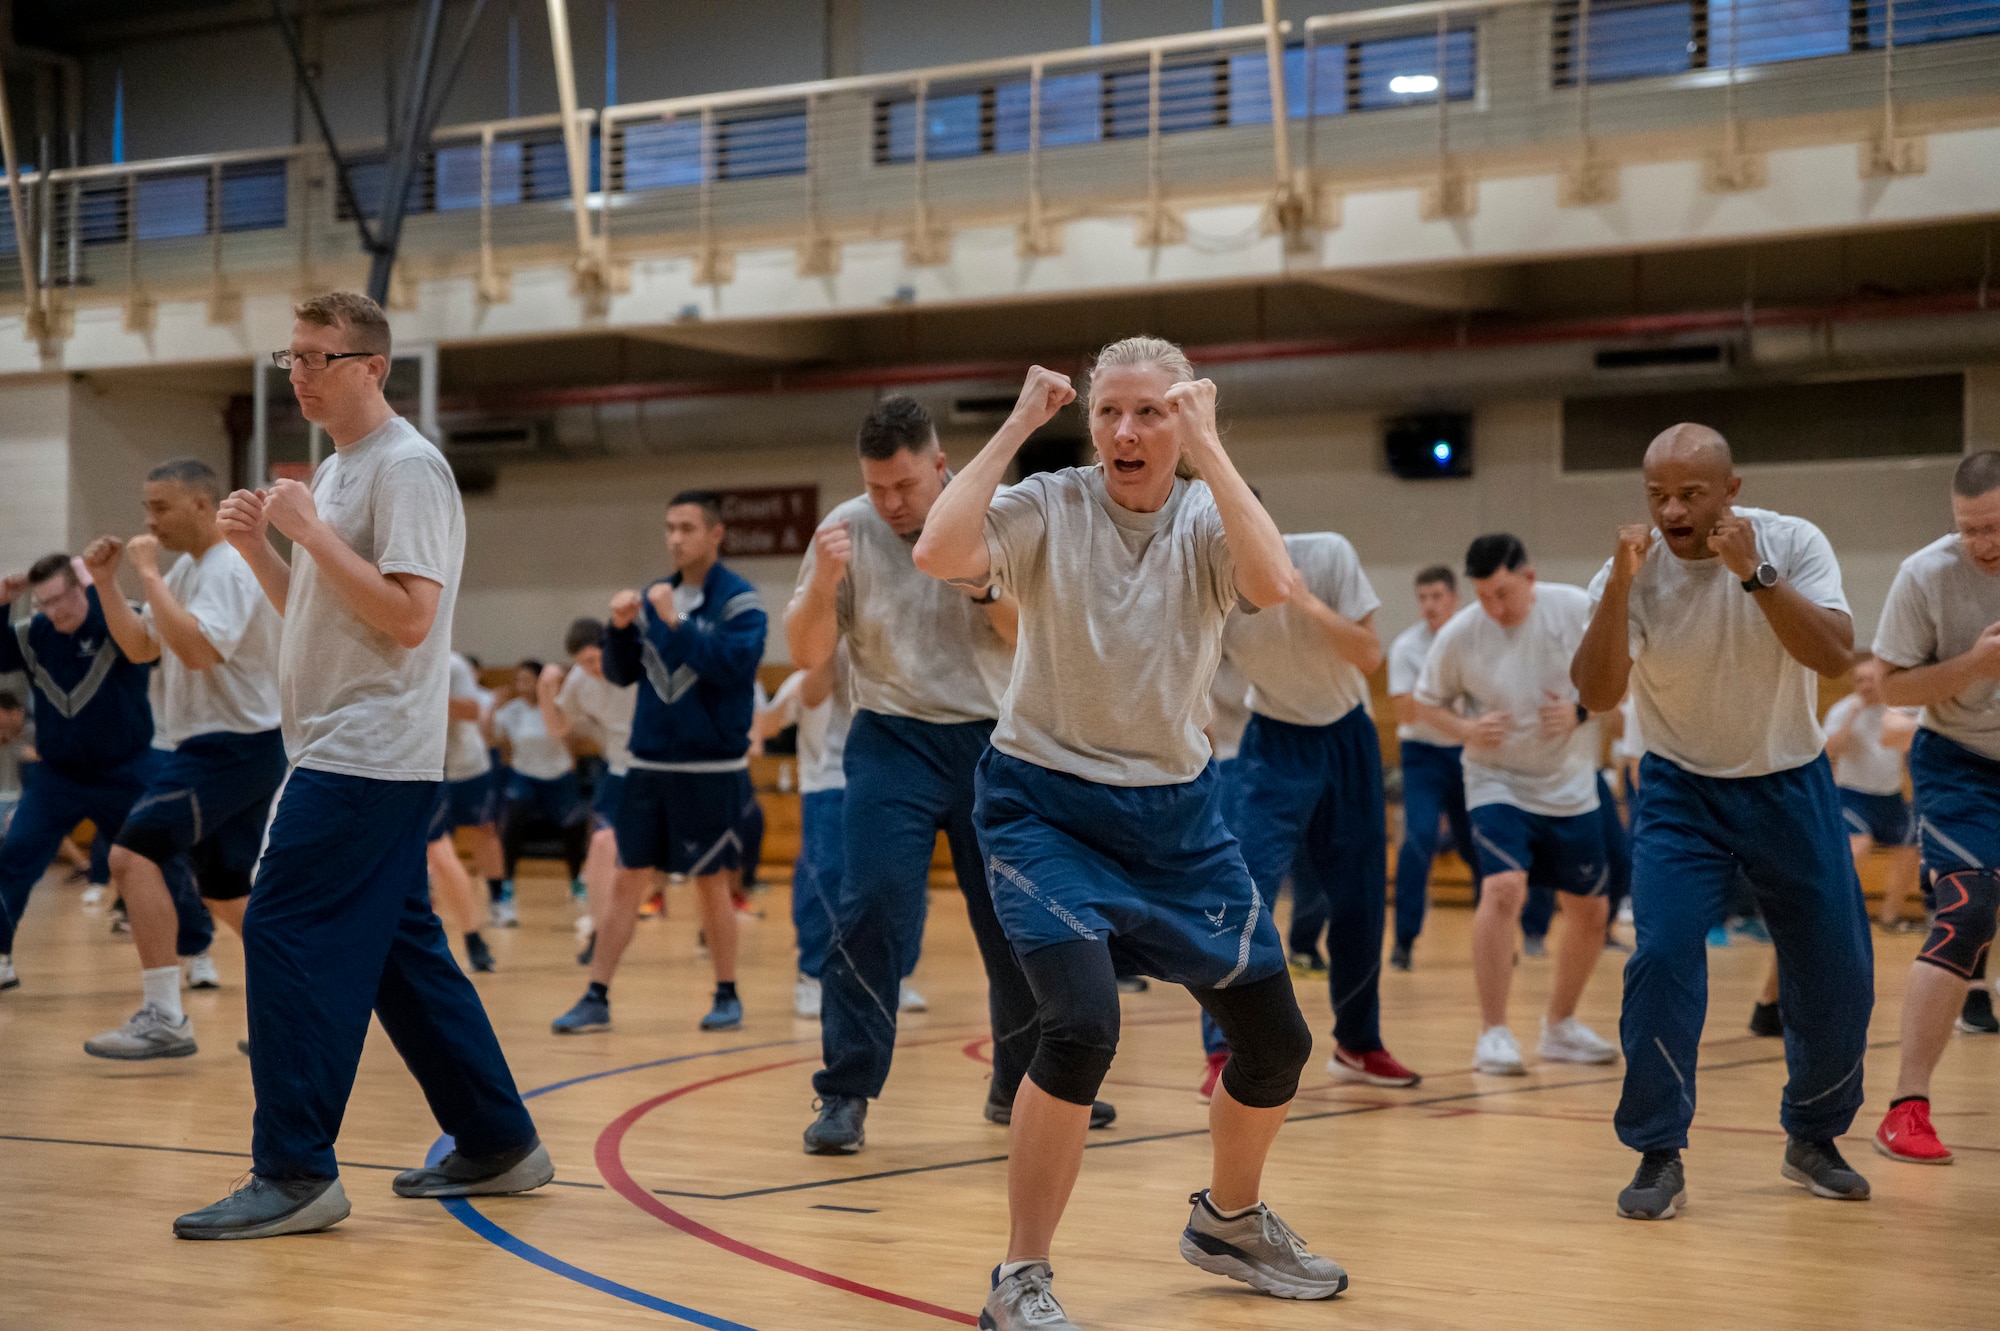 Lt. Col. Elizabeth Eychner, 51st Mission Support Group commander, assumes the combat warrior self-defense position during an MSG physical training session at Osan Air Base, Republic of Korea, June 30, 2022.